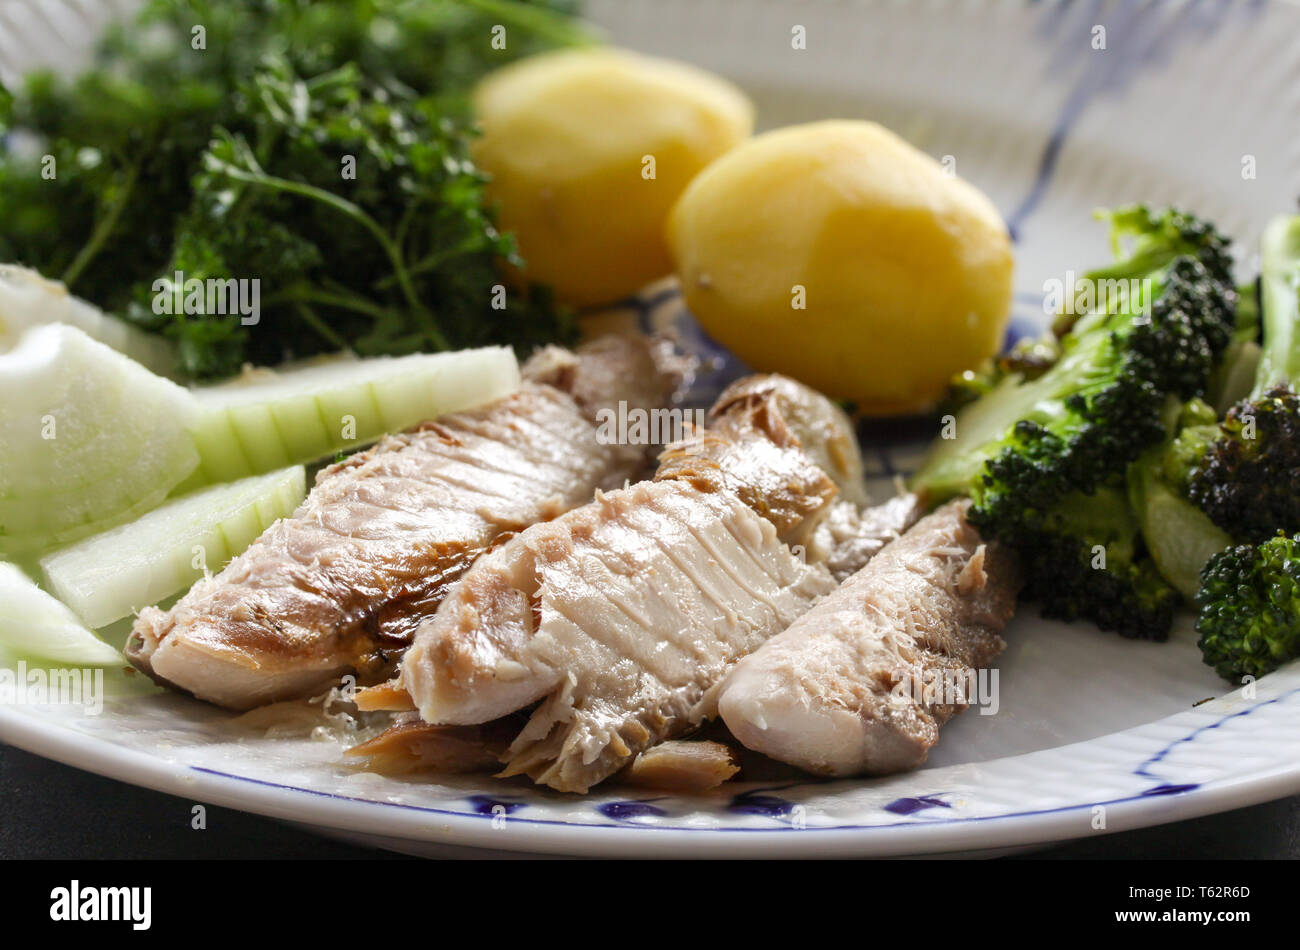 Mackerel fish dish with potatoes, broccoli, onions and parley. Fatty, oily fish is an excellent and healthy source of DHA and EPA, which are two key t Stock Photo